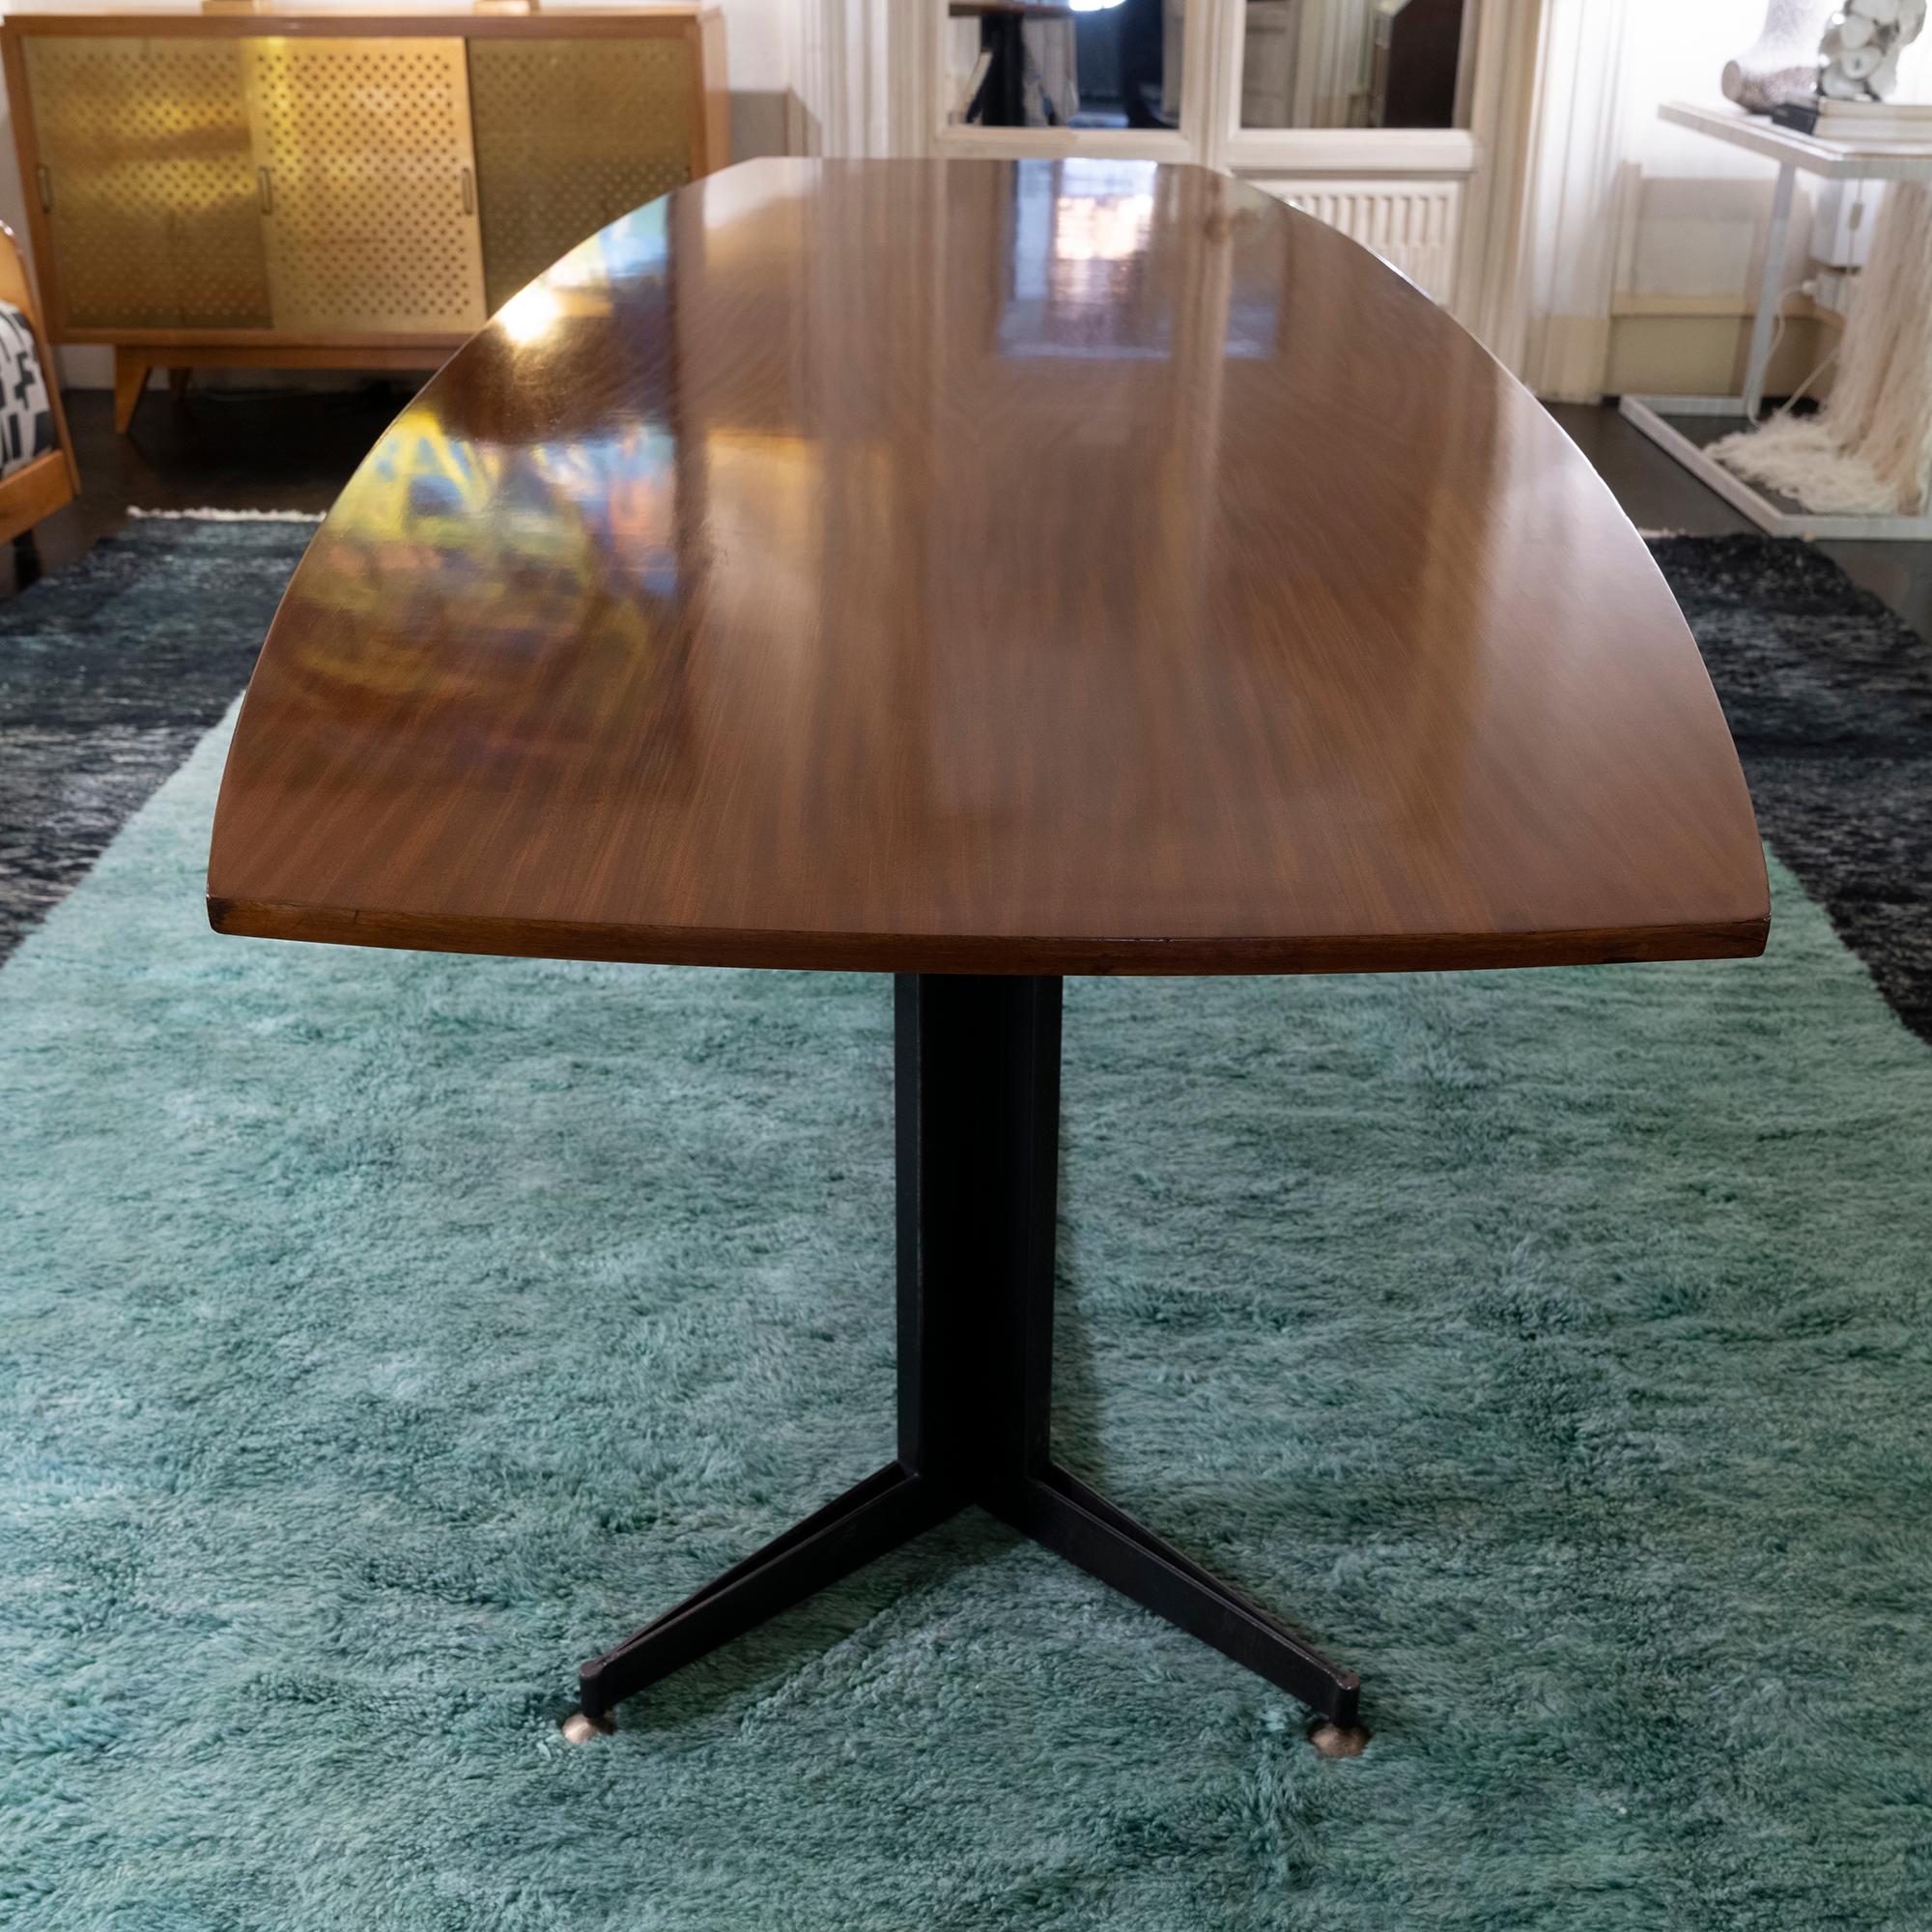 Mid-Century Modern conference or dining table, solid walnut top and black steel base with brass details, perfect condition and vintage patina, the table can be disassembled for transport, the top separates and the base also consists of 2 legs and 2